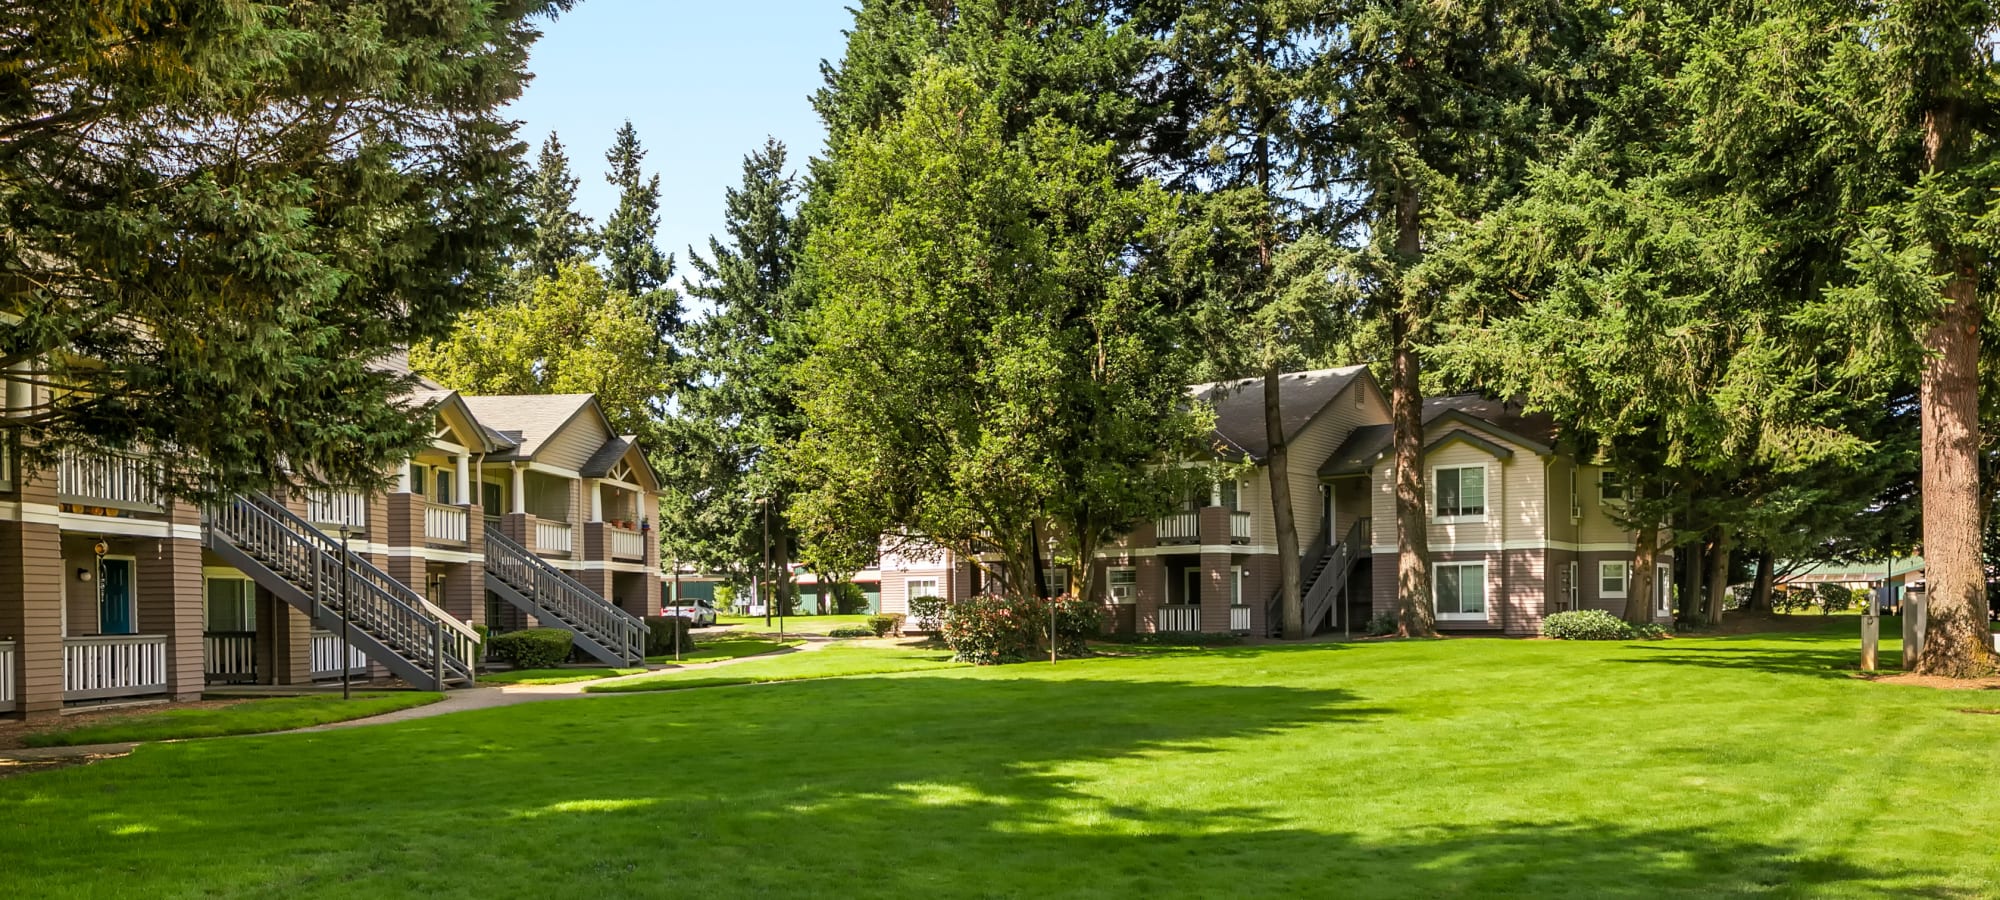 Apartments from Autumn Chase Apartments in Vancouver, Washington